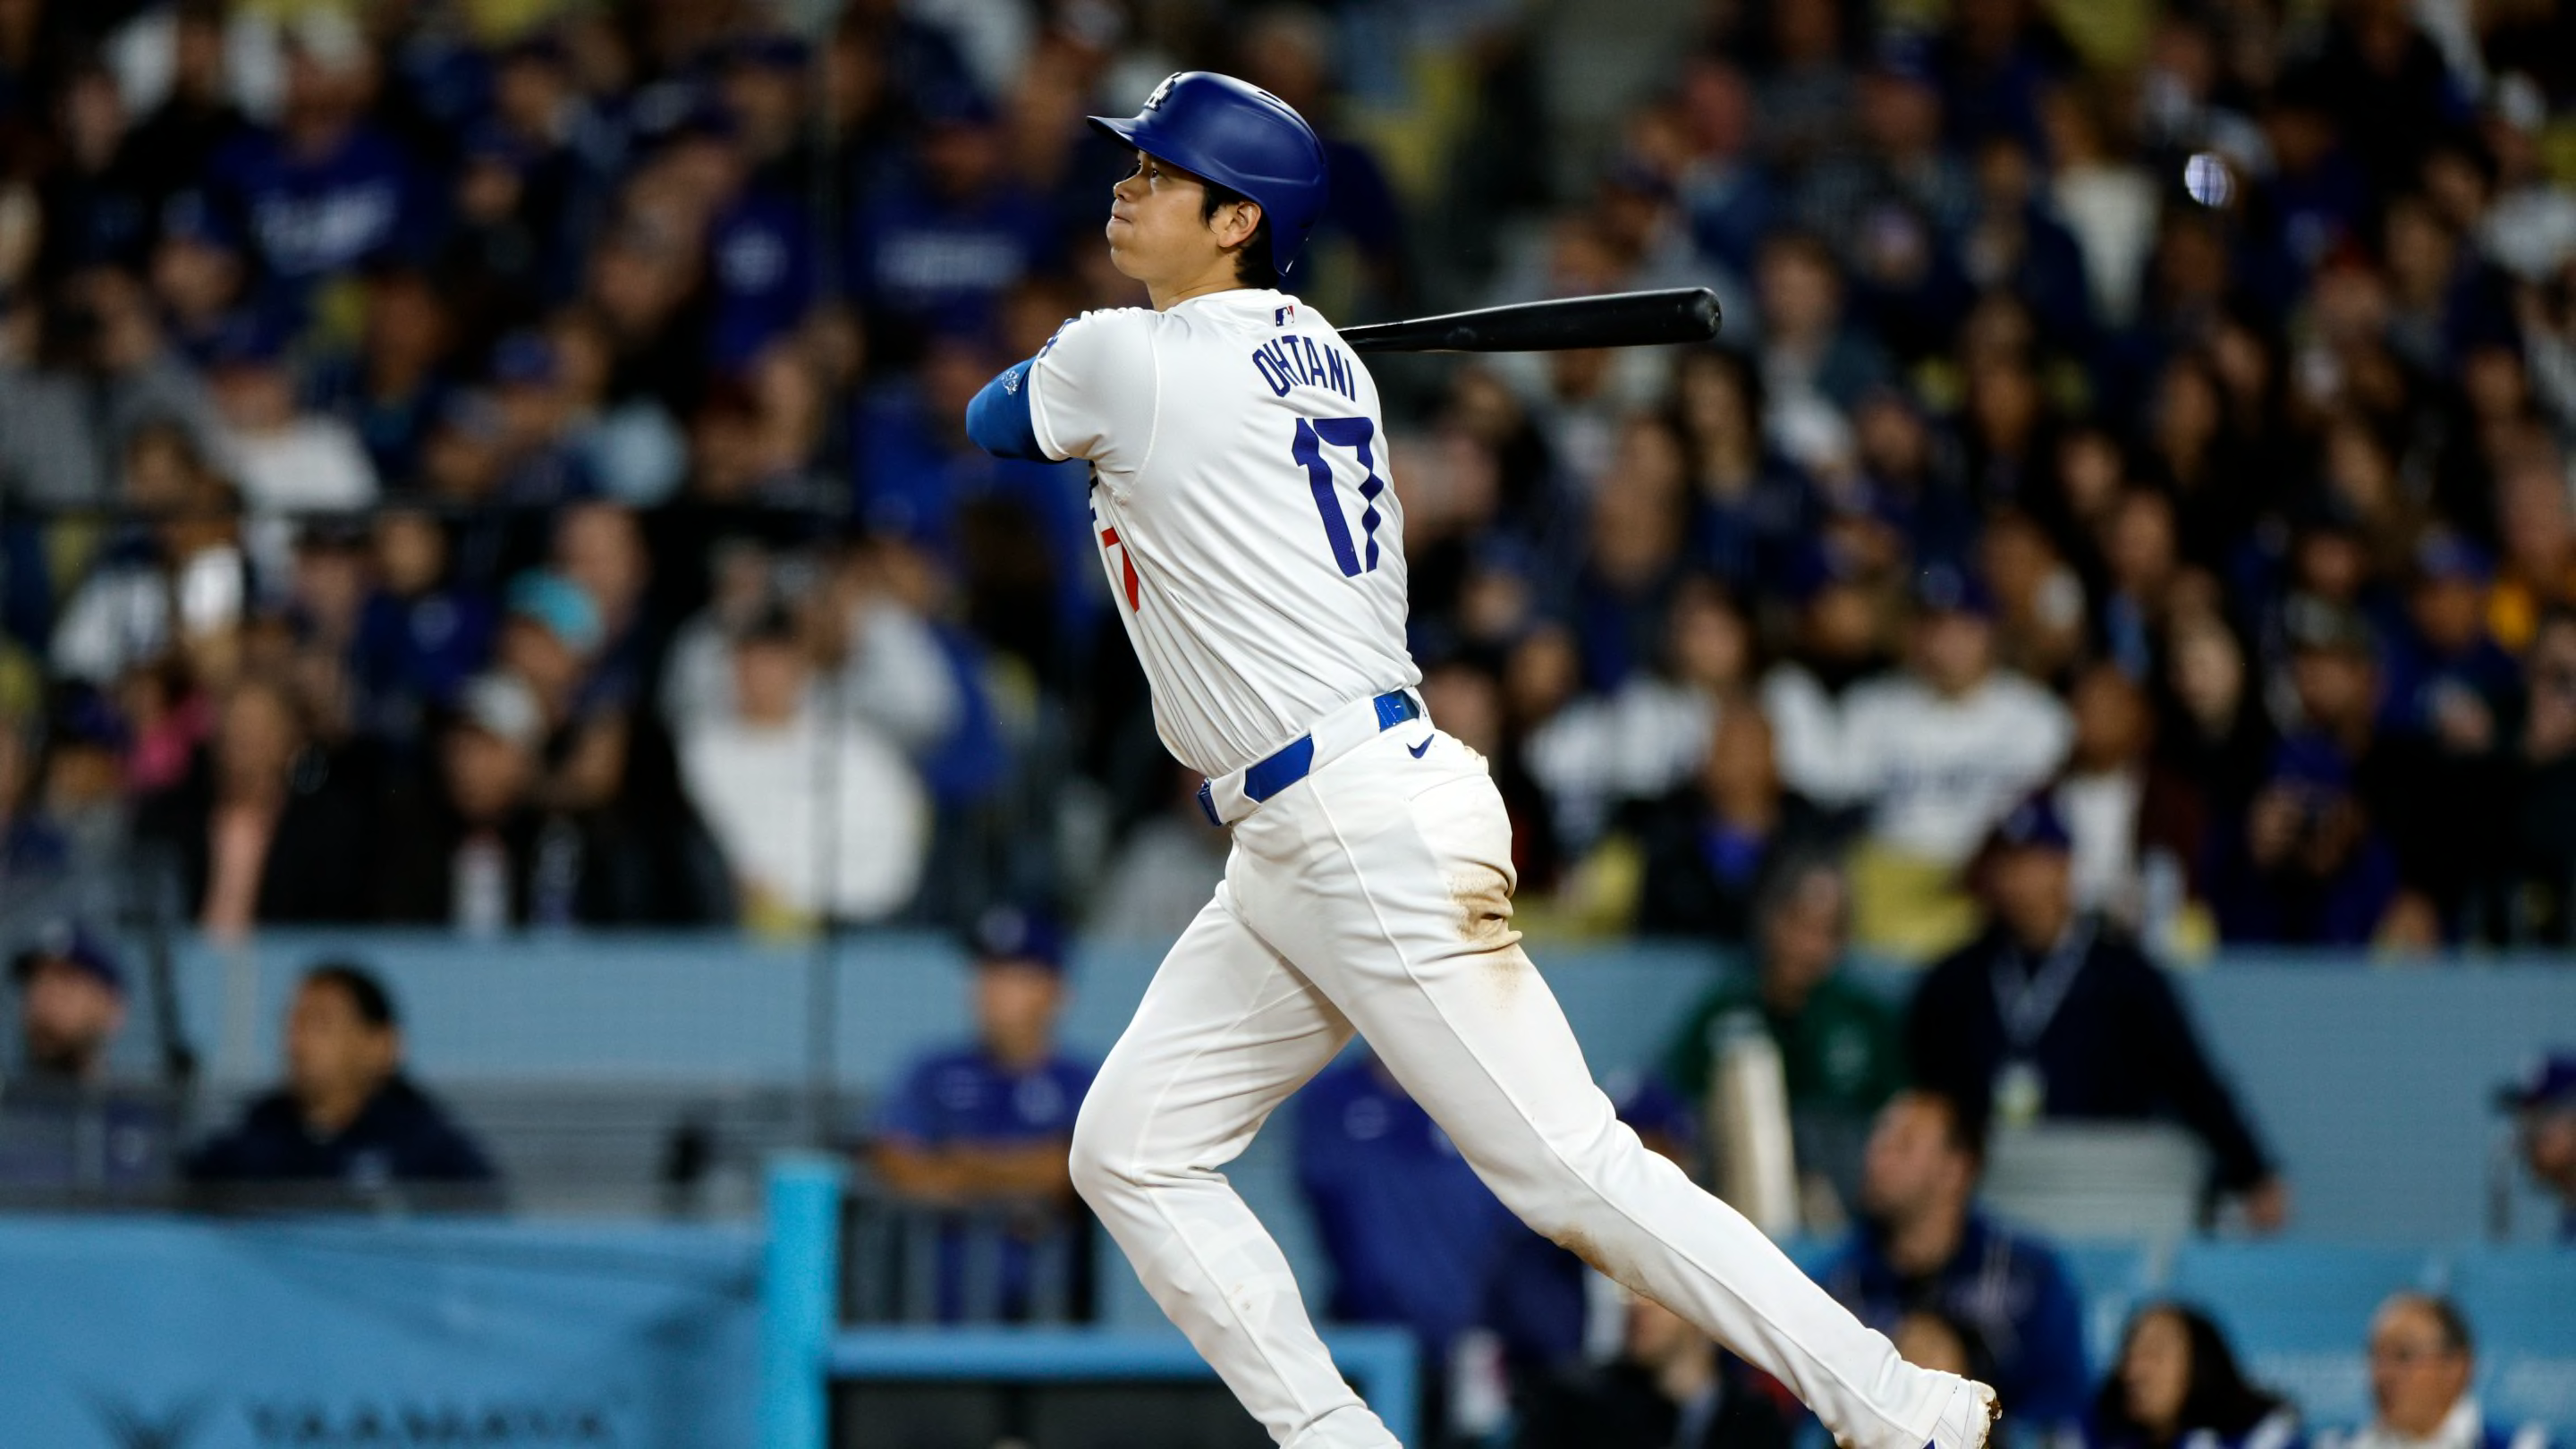 Chris Russo Blasts Dodgers and Shohei Ohtani For Treatment of Fan Who
Caught Home Run Ball